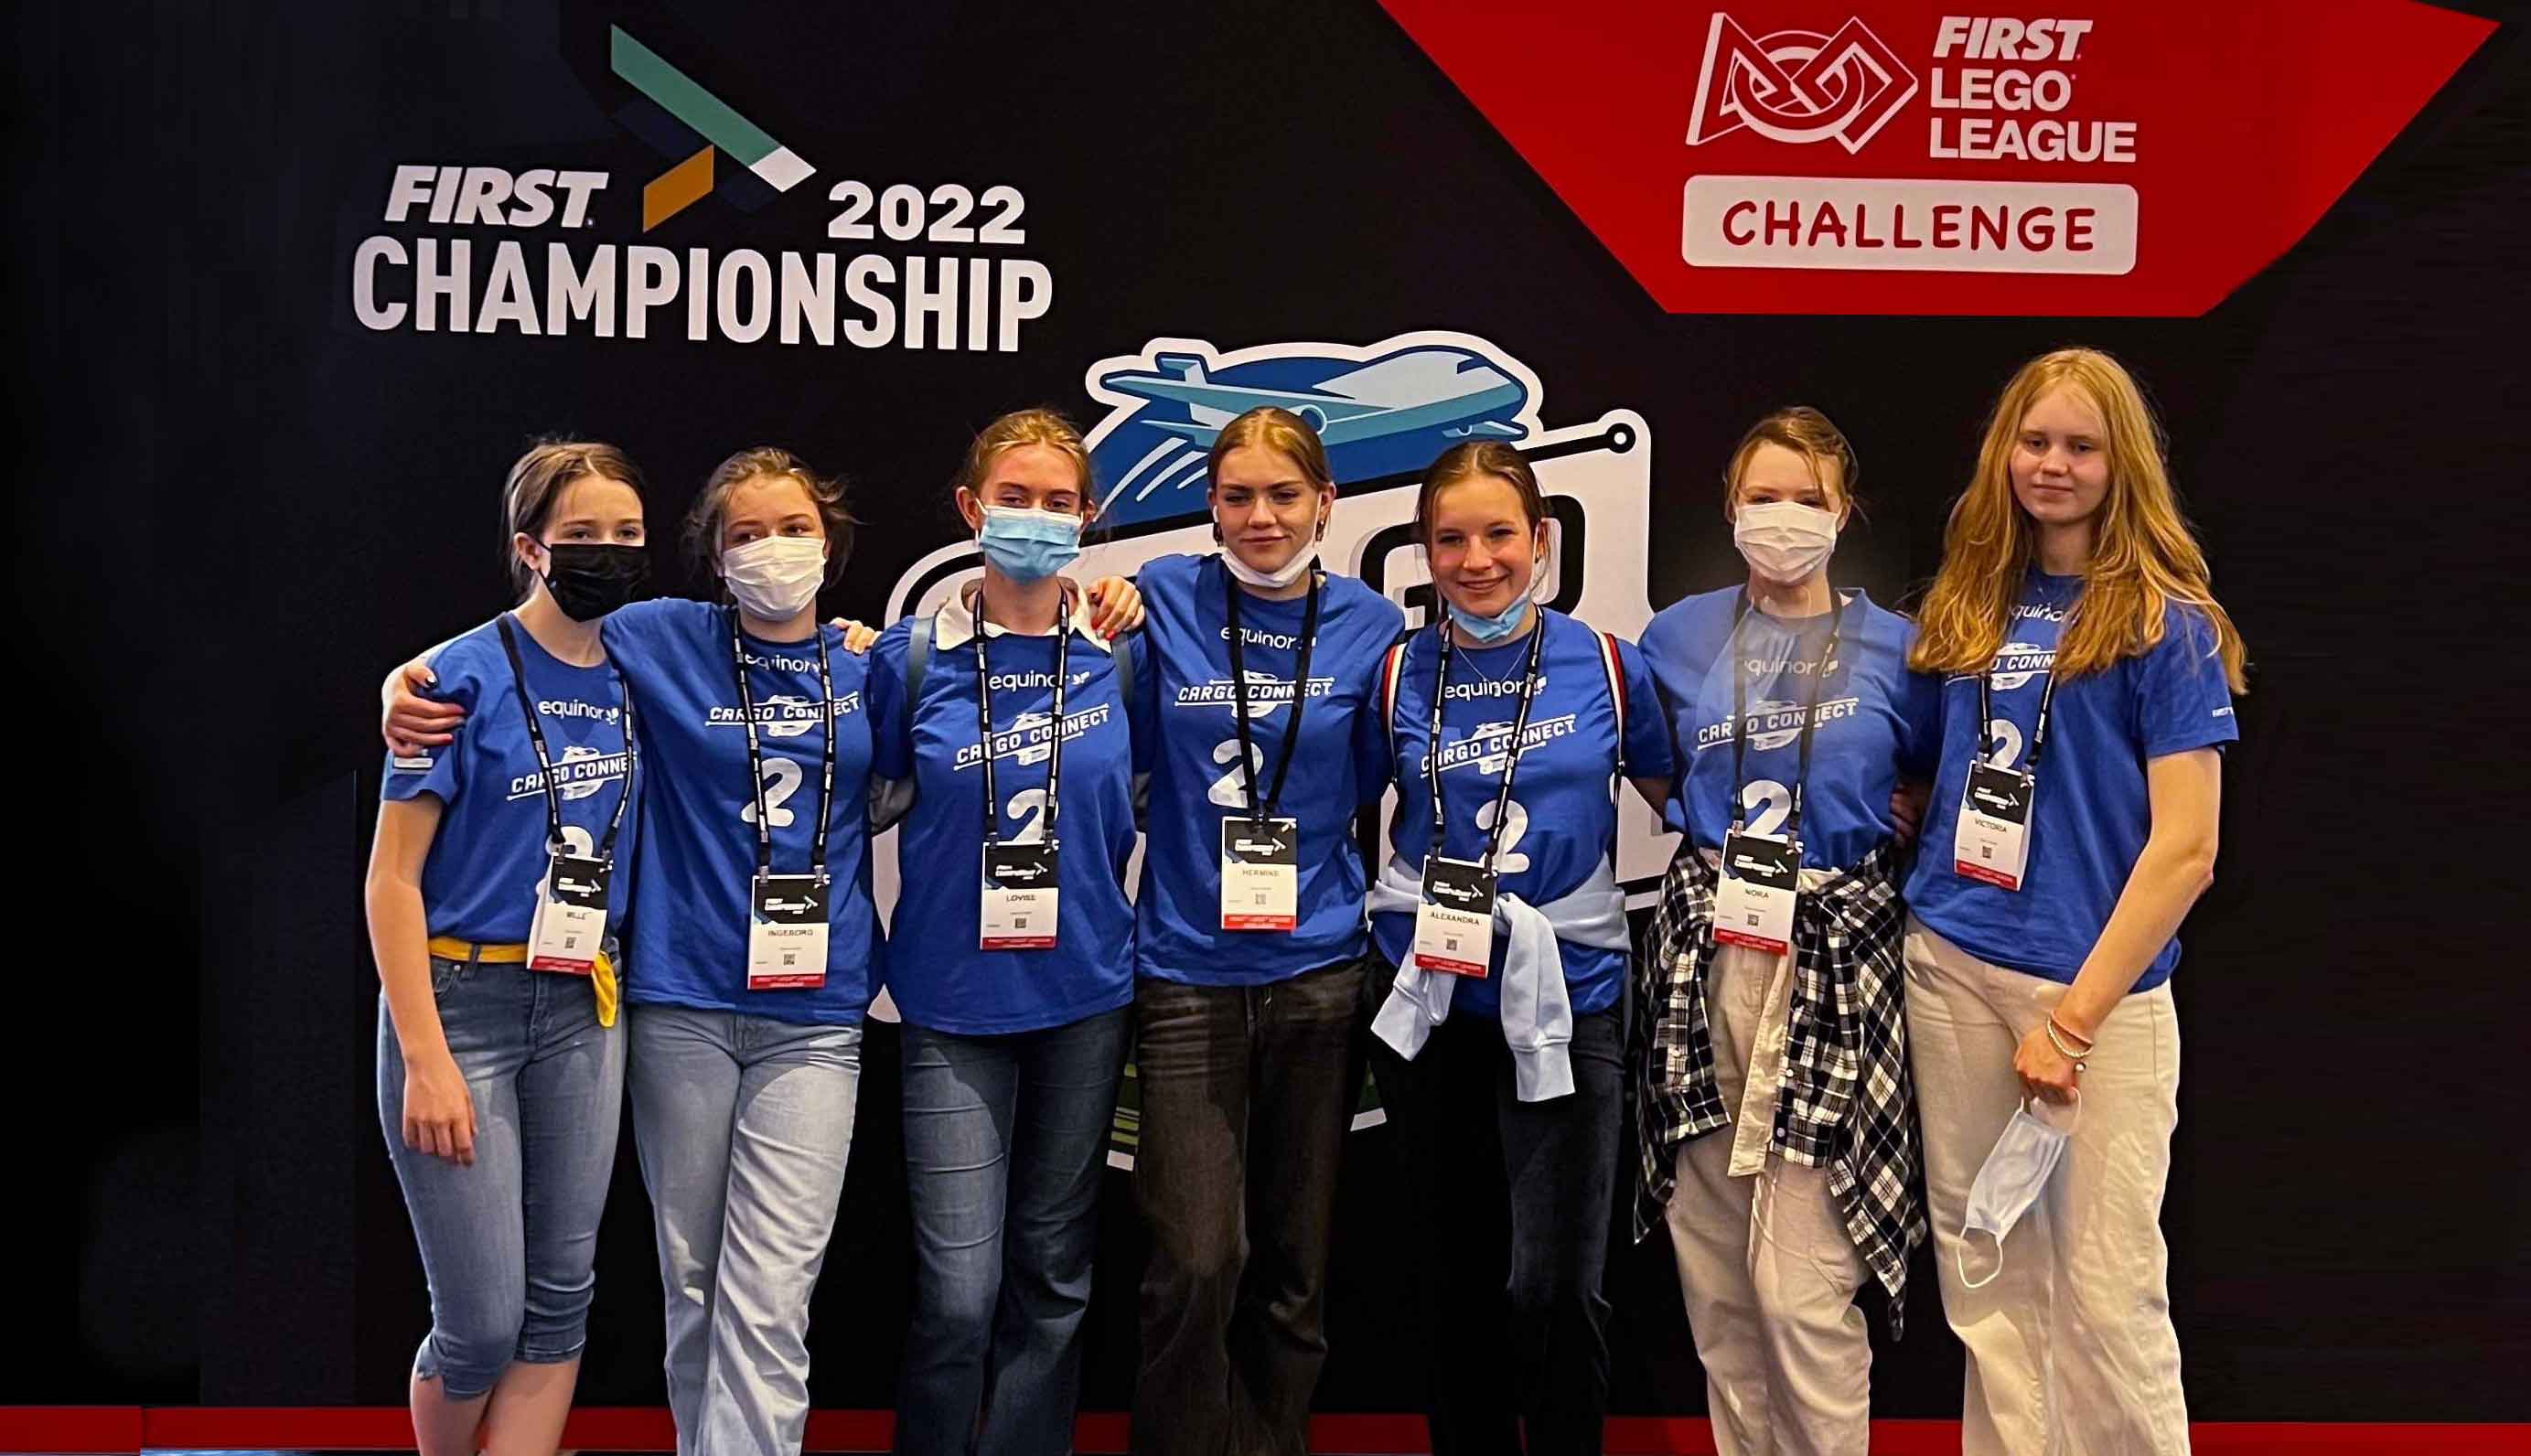 Girls participating in a tech challenge in Texas, smiling in front of a sponsored banner 